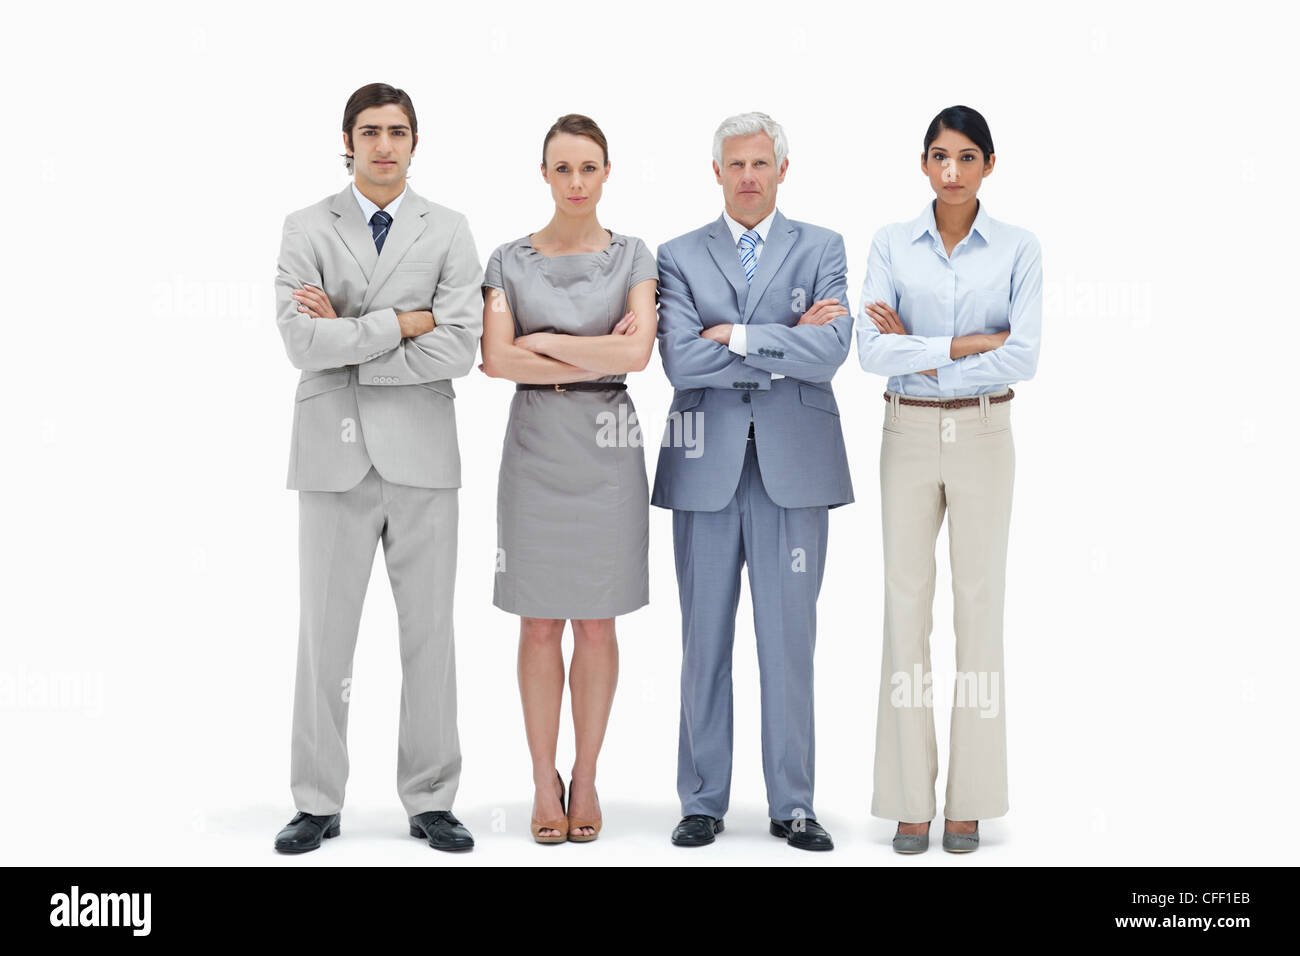 Serious multicultural business team crossing their arms Stock Photo